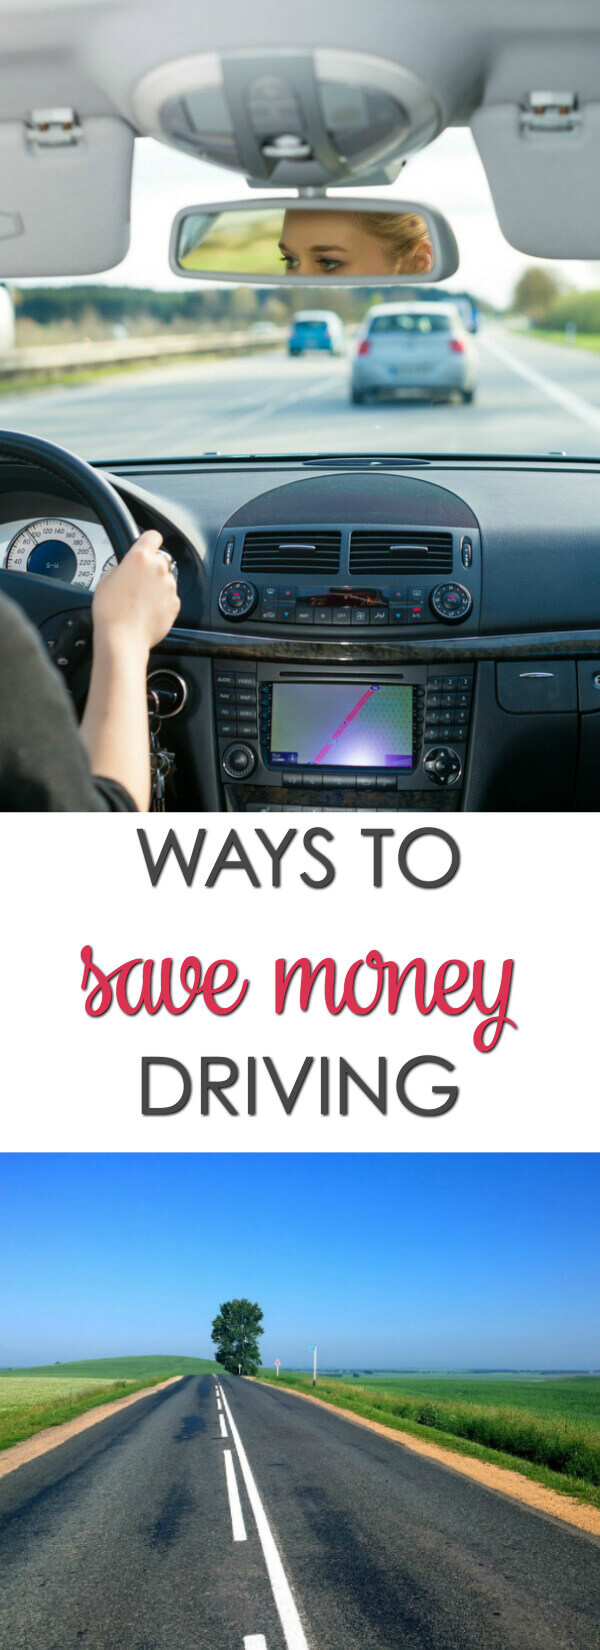 Ways to save money driving